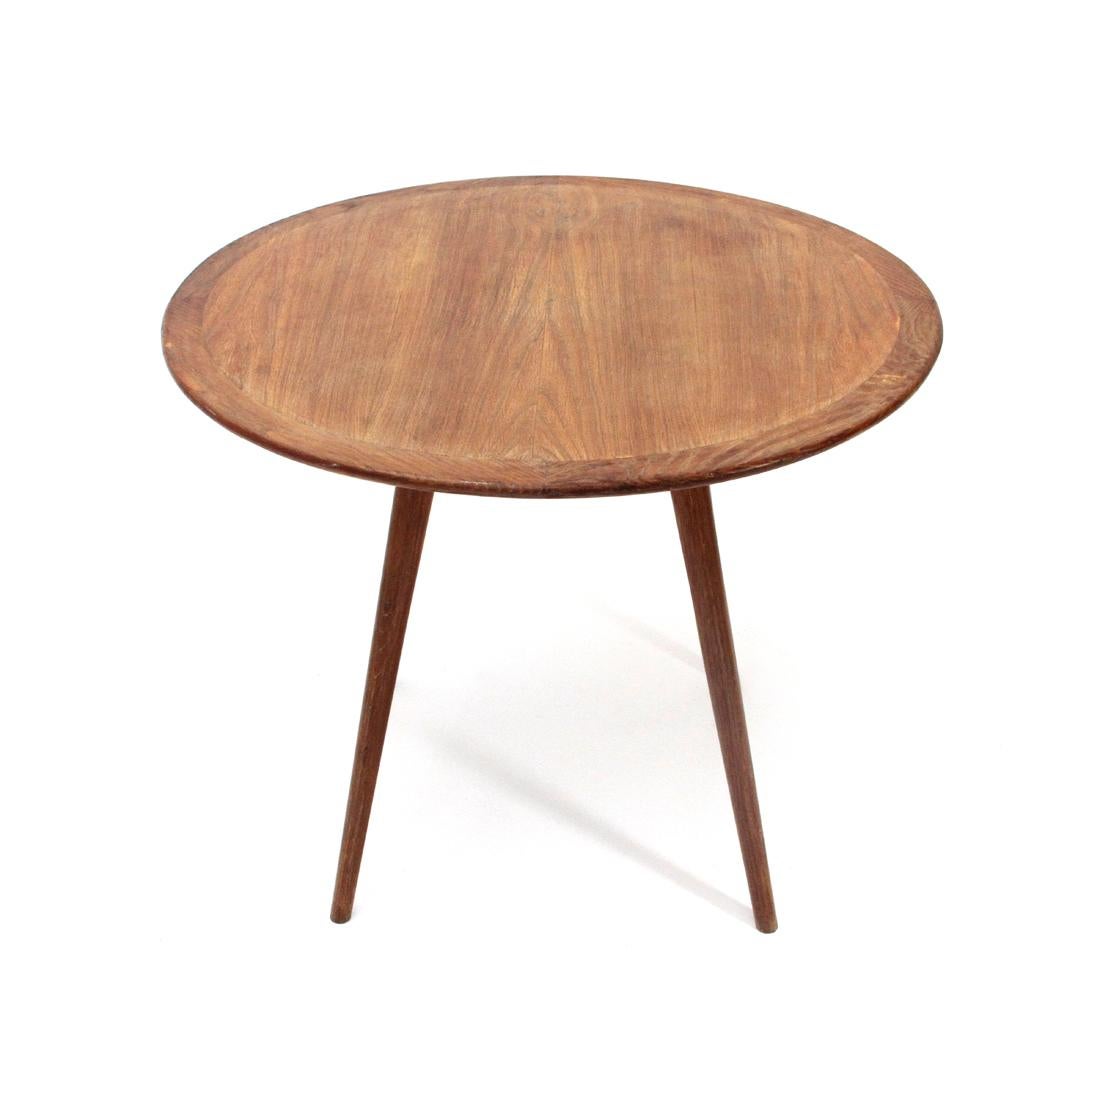 Italian Wooden Coffee Table with Round Top, 1950s